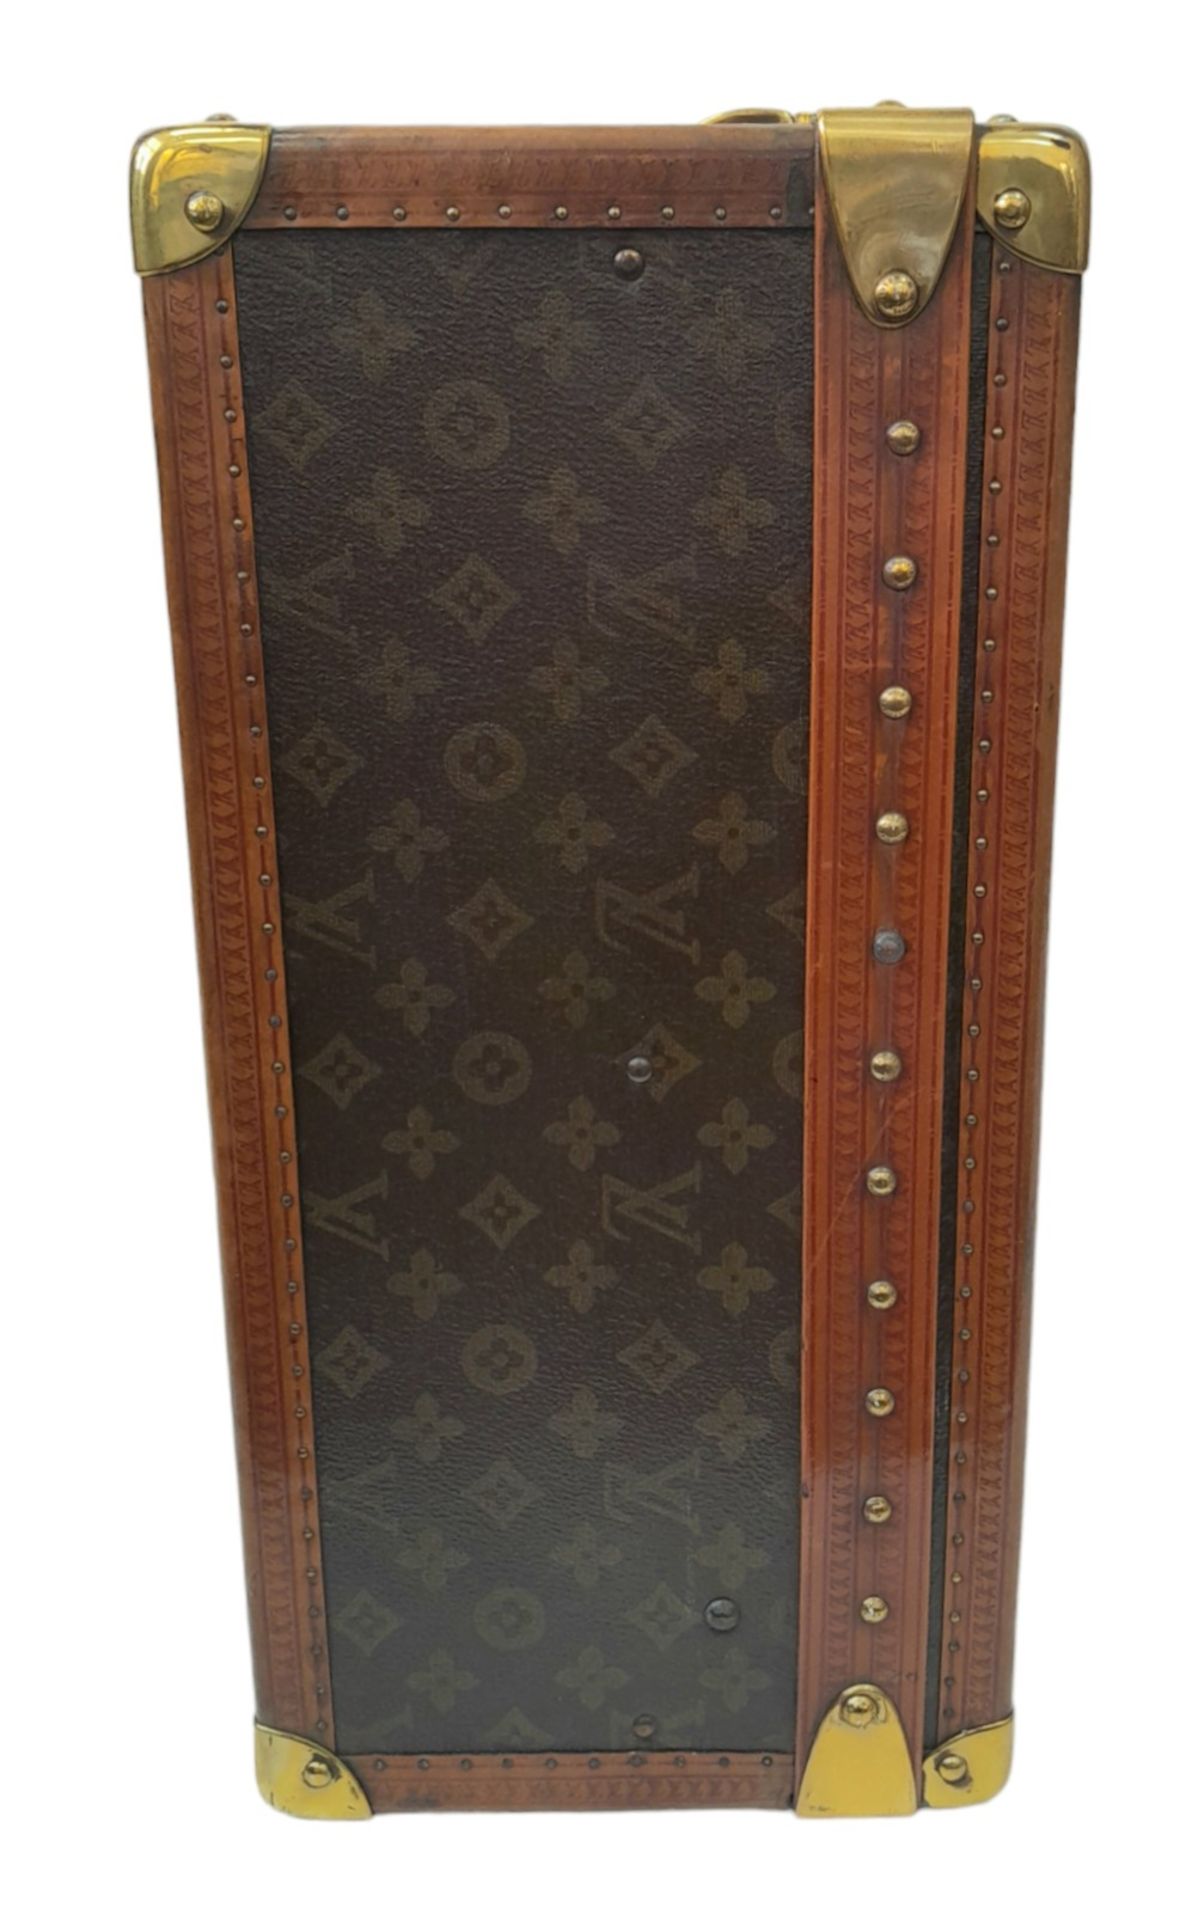 A Vintage Possibly Antique Louis Vuitton Trunk/Hard Suitcase. Canvas monogram LV exterior with - Image 4 of 16